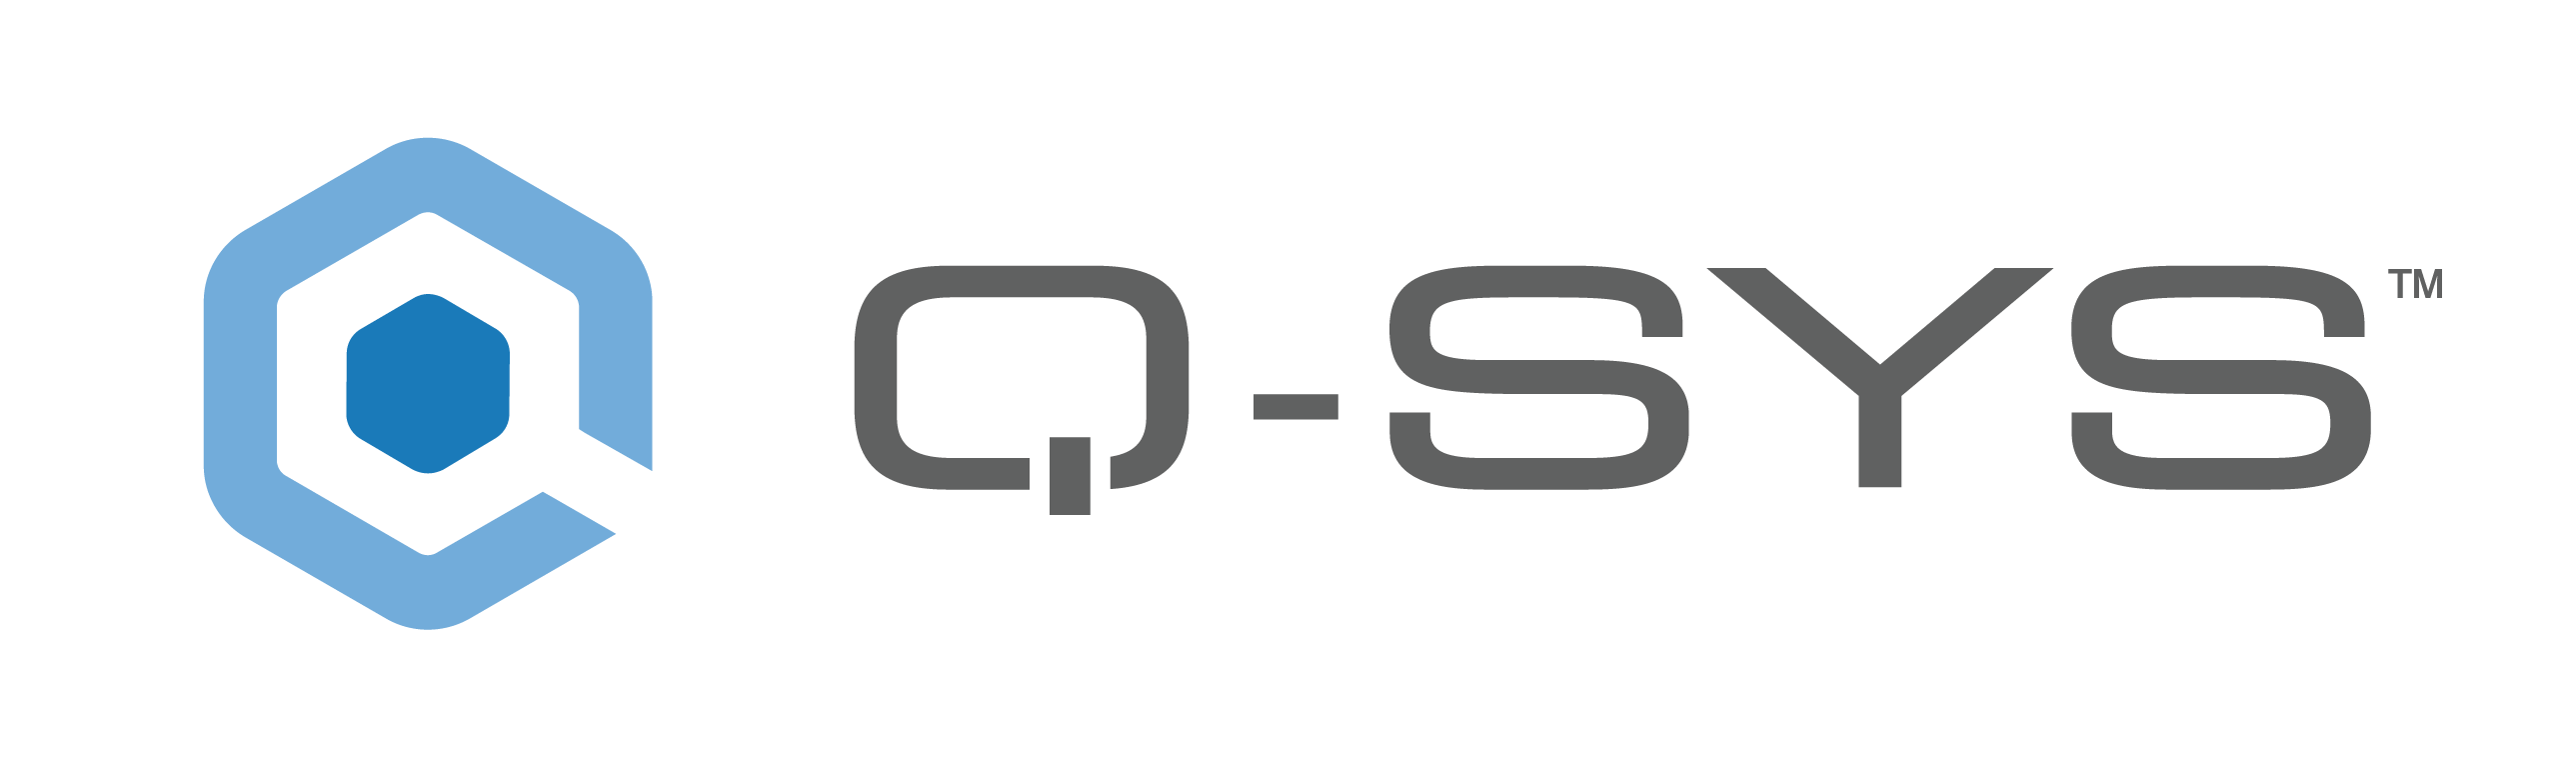 Q-SYS_hex_logo_full_color_wide_final-01